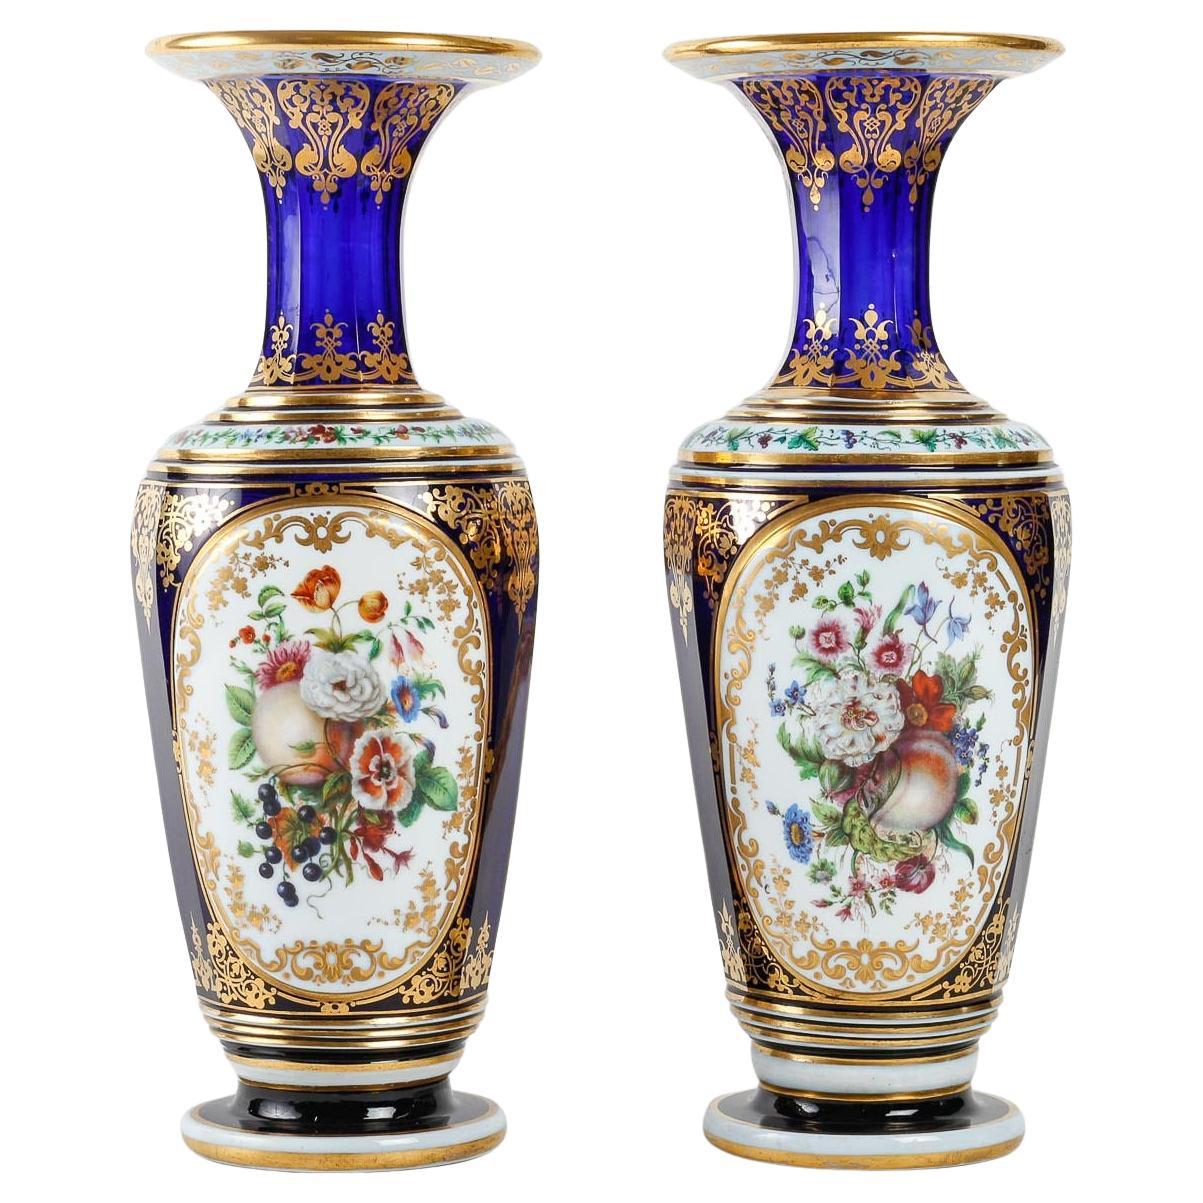 Pair of Baccarat Crystal and Painted Opaline Vases, Napoleon III Period. For Sale